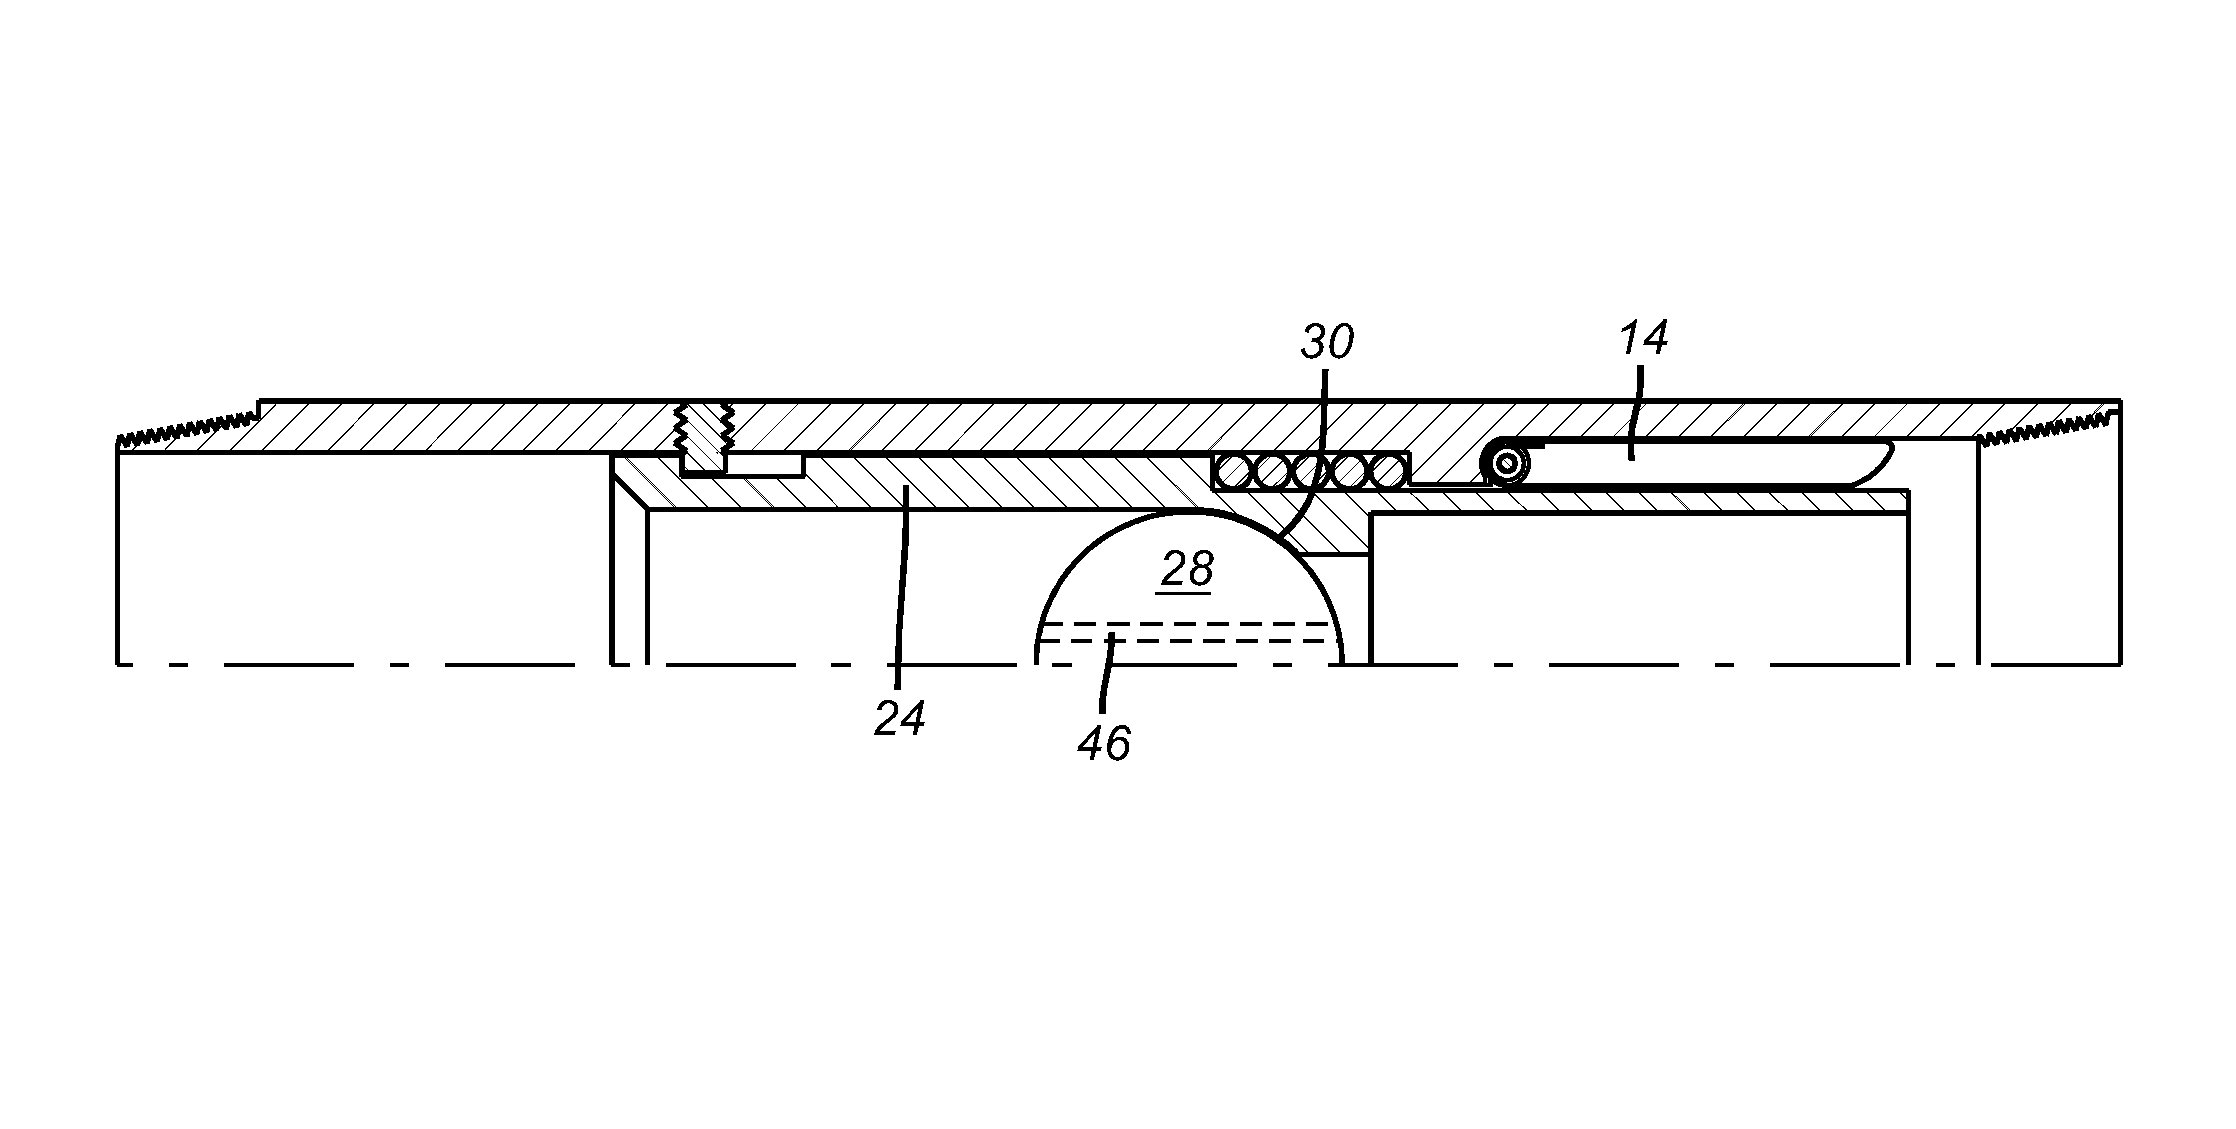 Injection valve with indexing mechanism